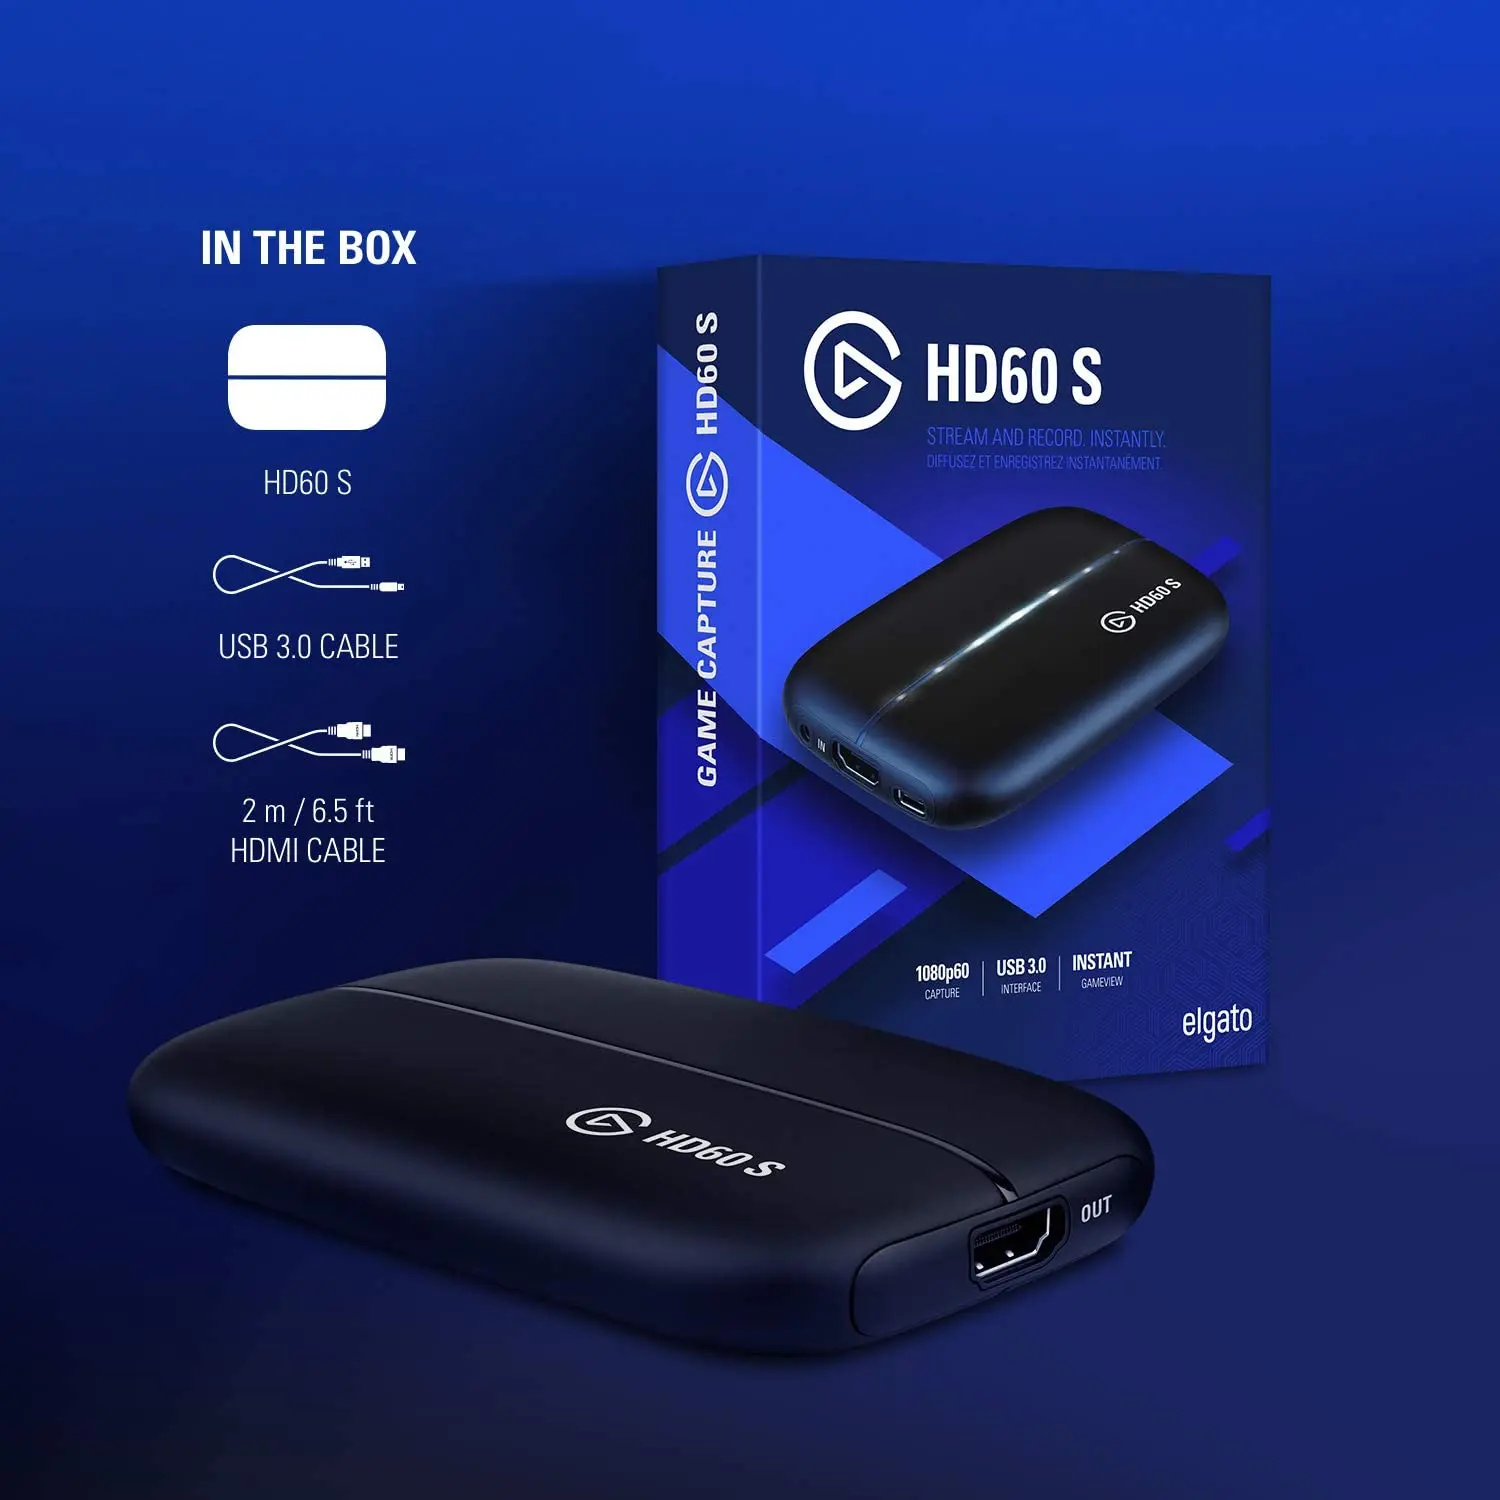 Elgato HD60 S Capture Card, 1080p 60 Capture, Zero-Lag Passthrough, Ultra-Low Latency, PS5, PS4 Xbox Series X/S Xbox One USB 3.0 images - 6